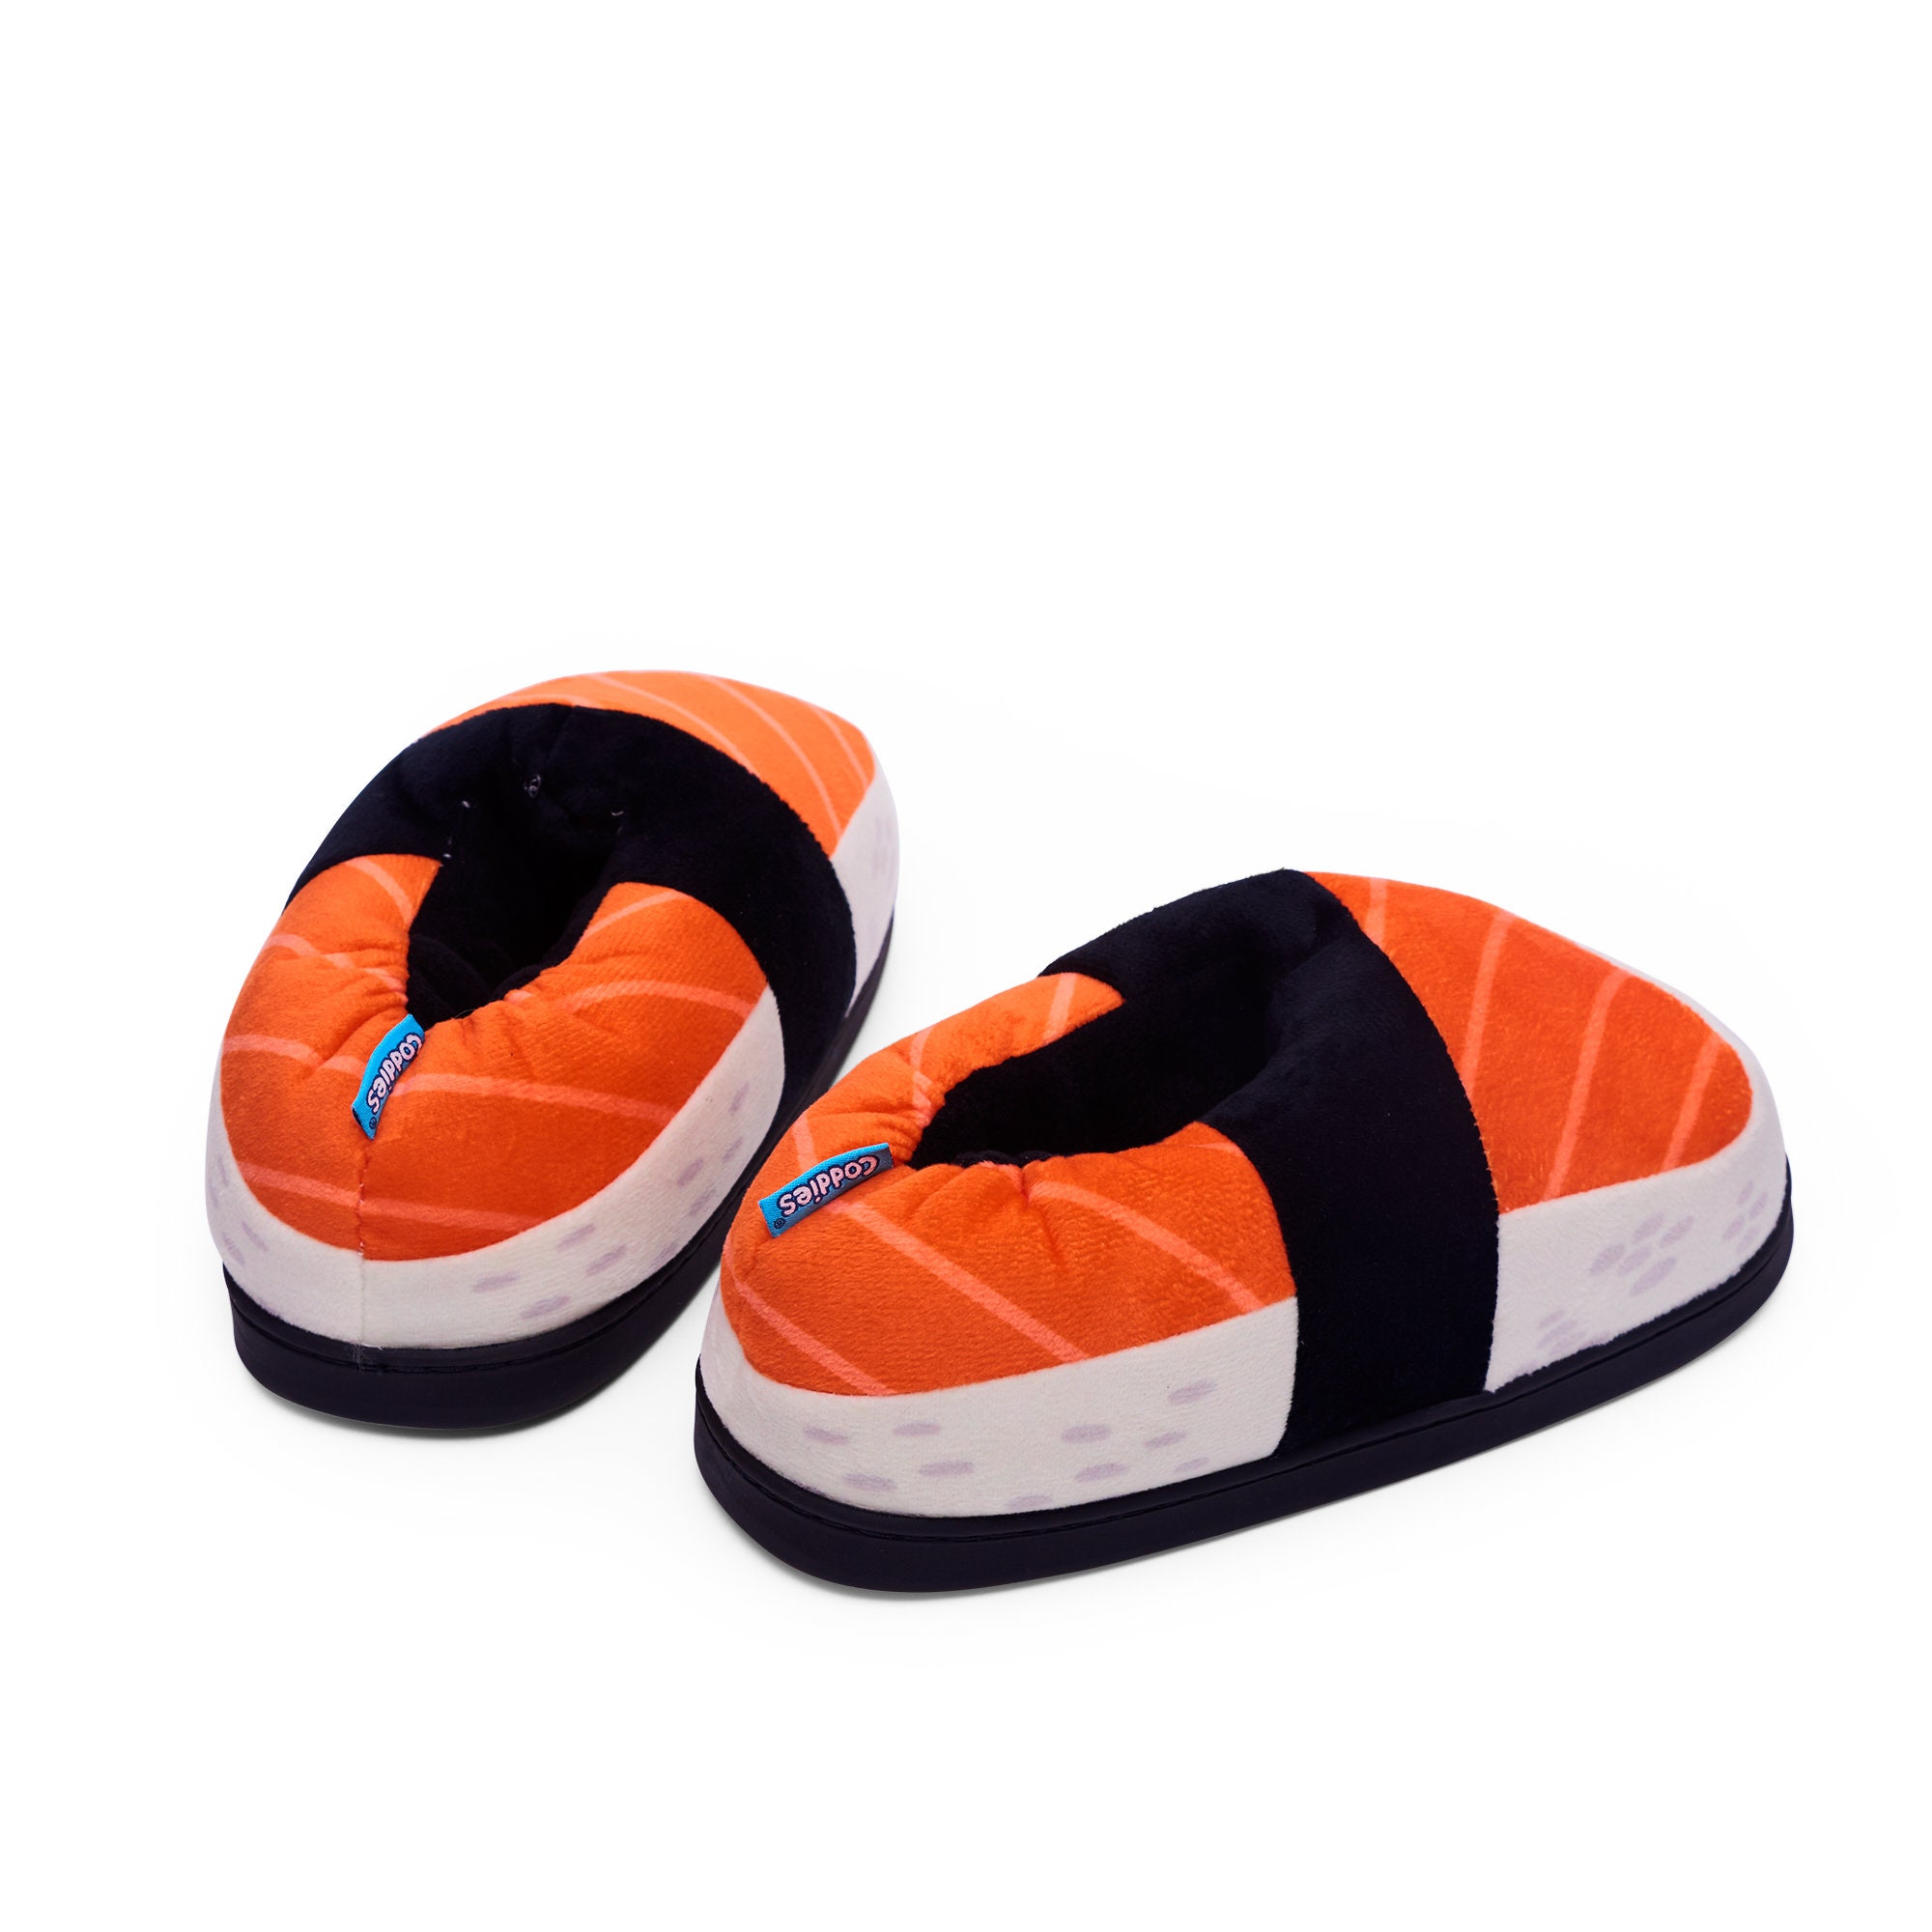 Coddies Sushi shoe-shi Shoes for Indoor - Etsy